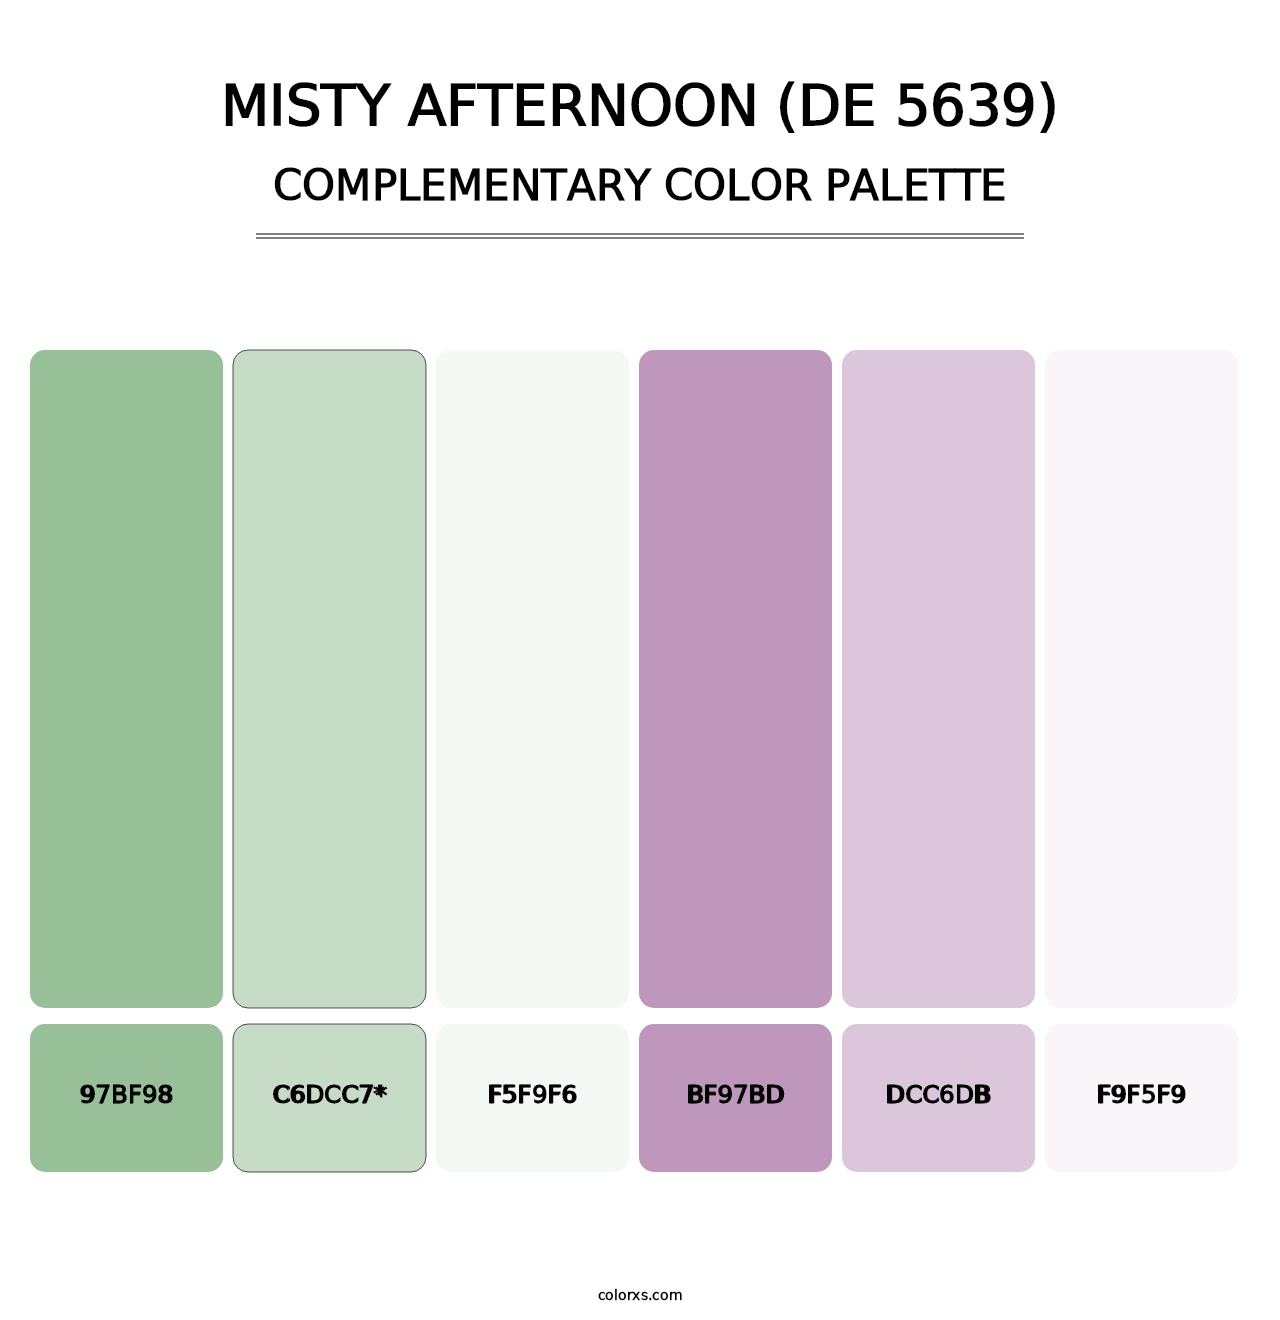 Misty Afternoon (DE 5639) - Complementary Color Palette